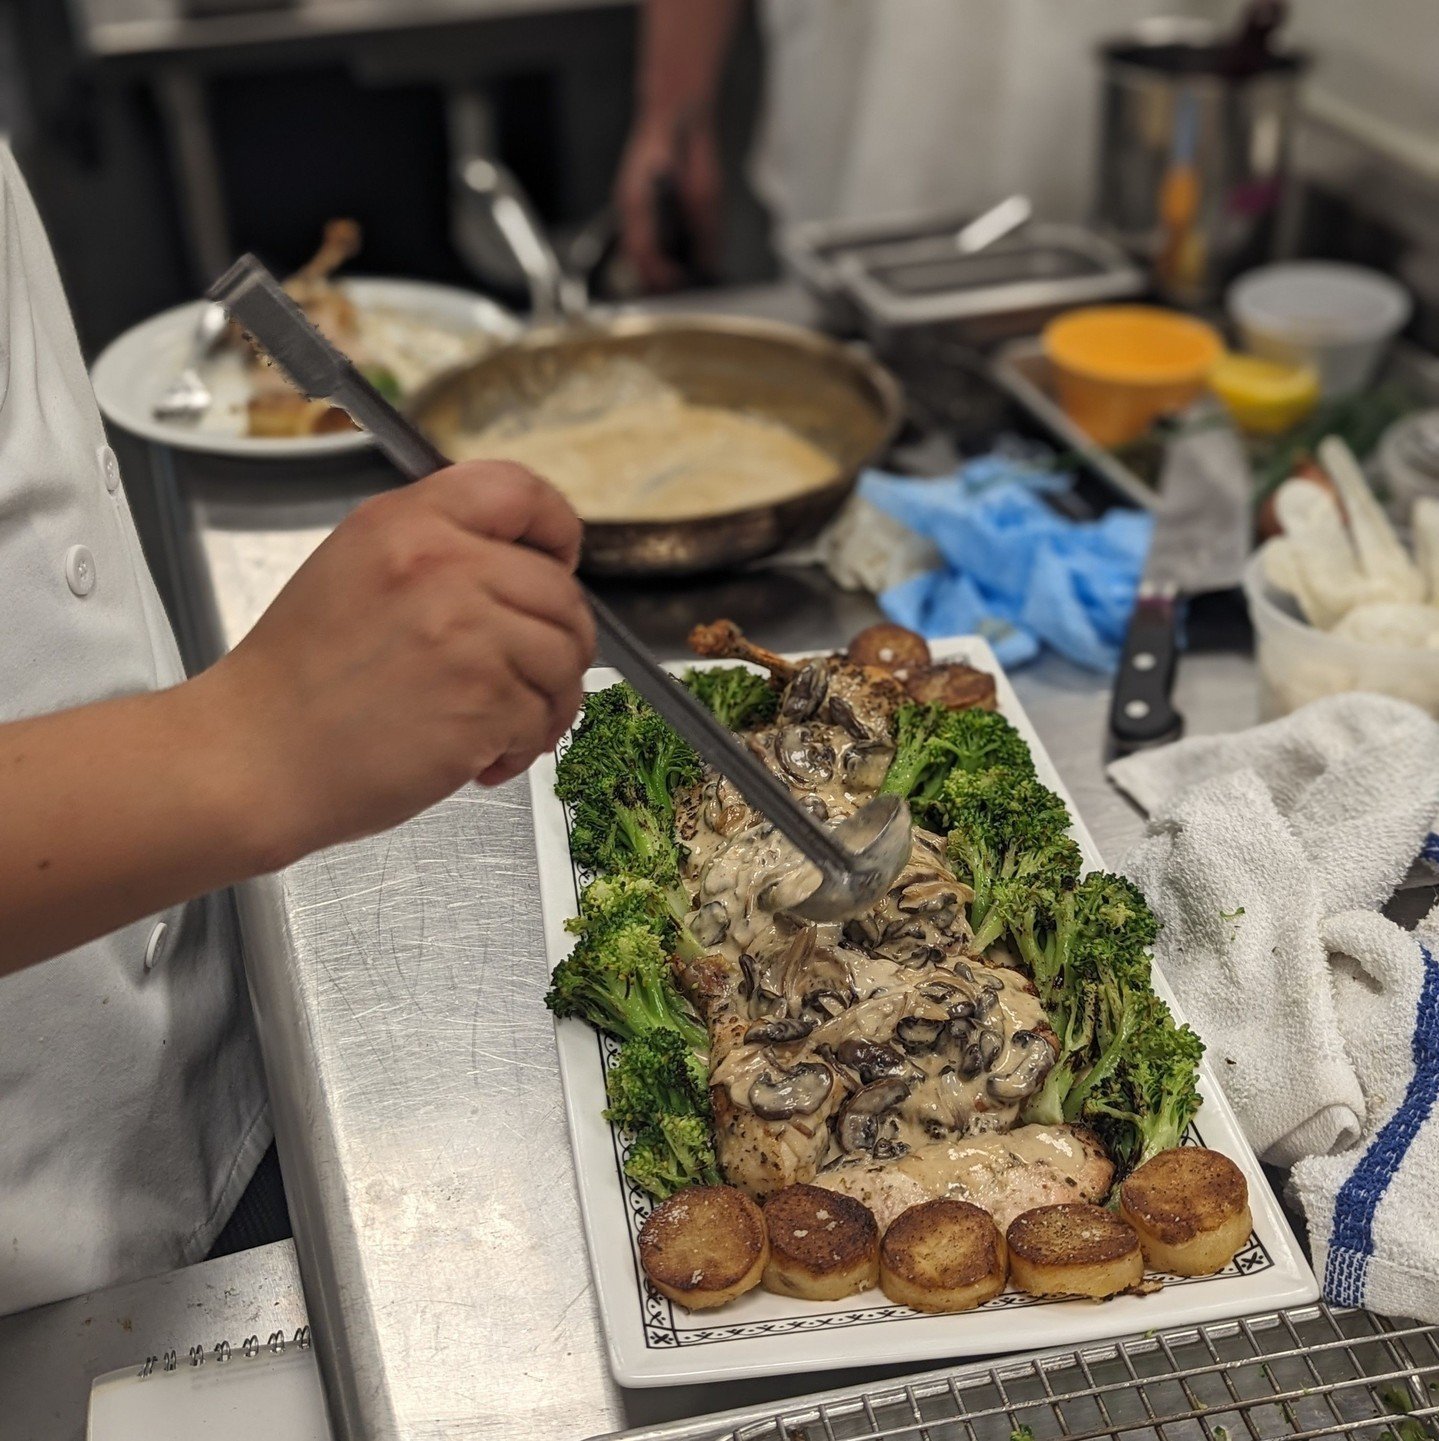 Our Culinary Arts students are about to head out on externship prior to prepping for their pop-up restaurant, but not before their final practical and written exams to showcase that they've mastered the skills learned throughout the program. Most of 